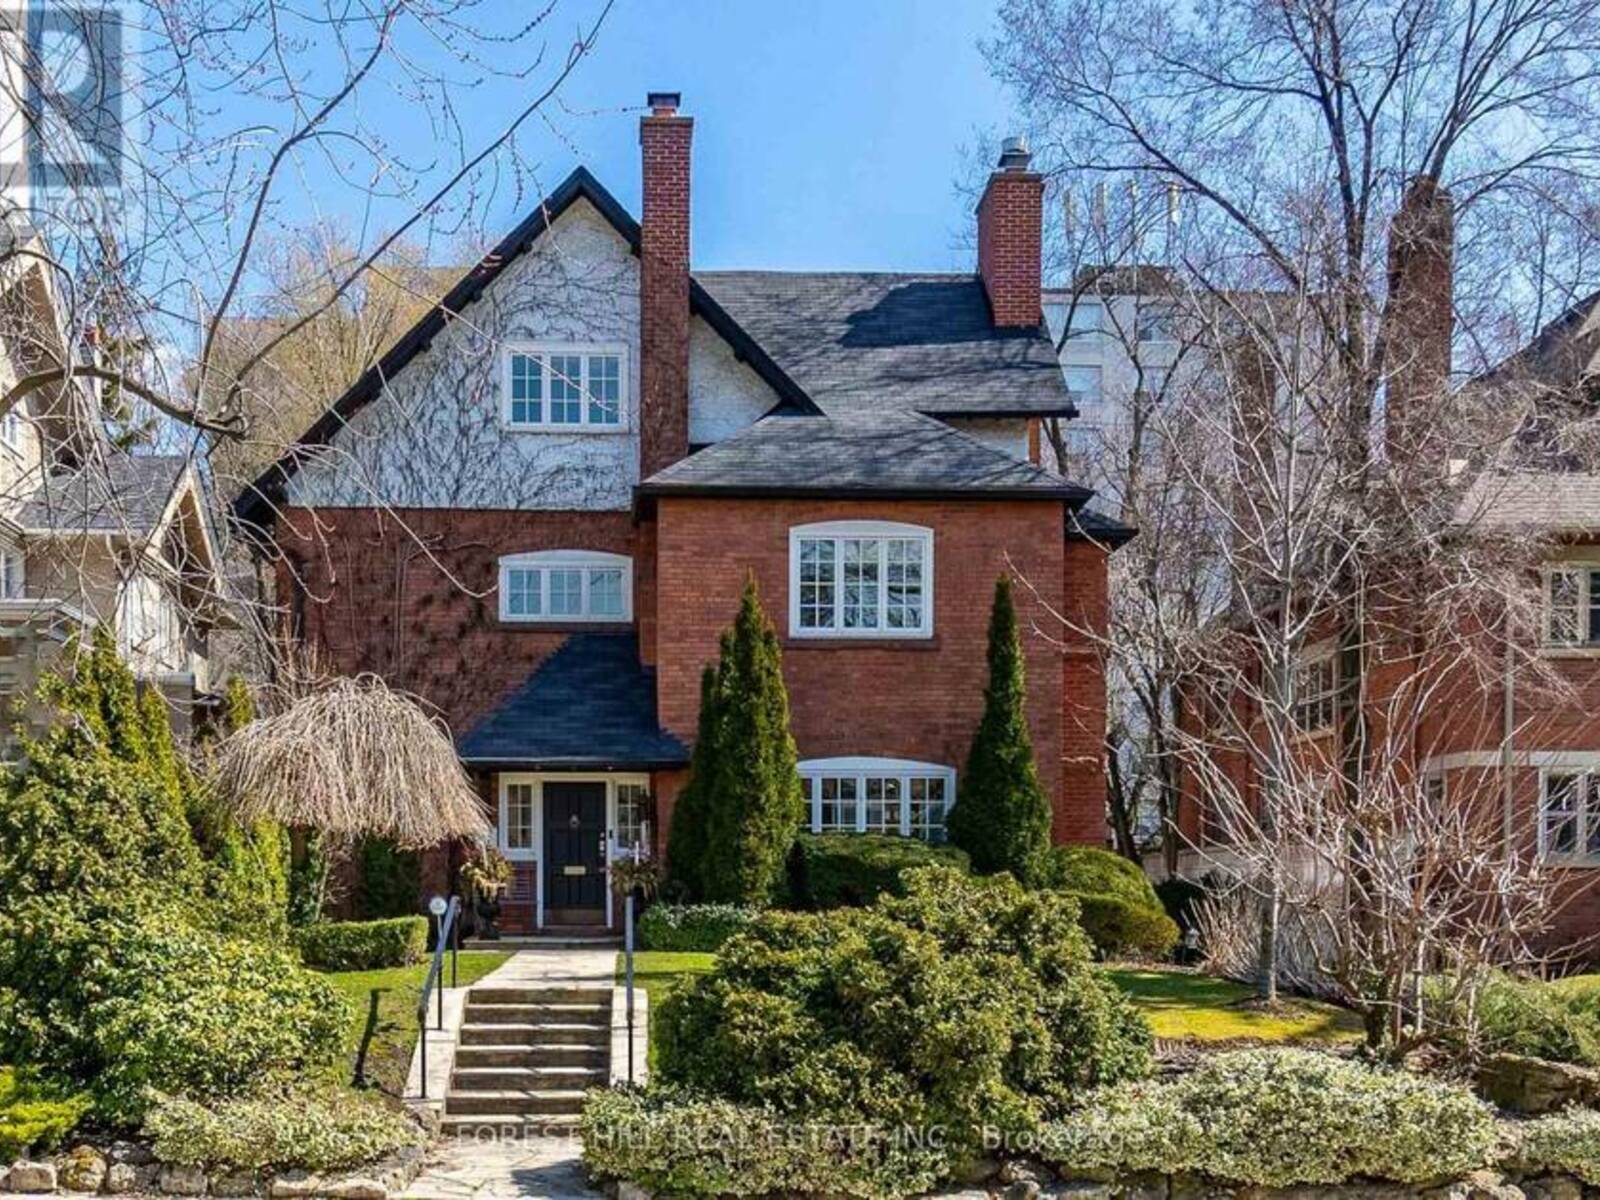 77 FOREST HILL ROAD, Toronto, Ontario M4V 2L6